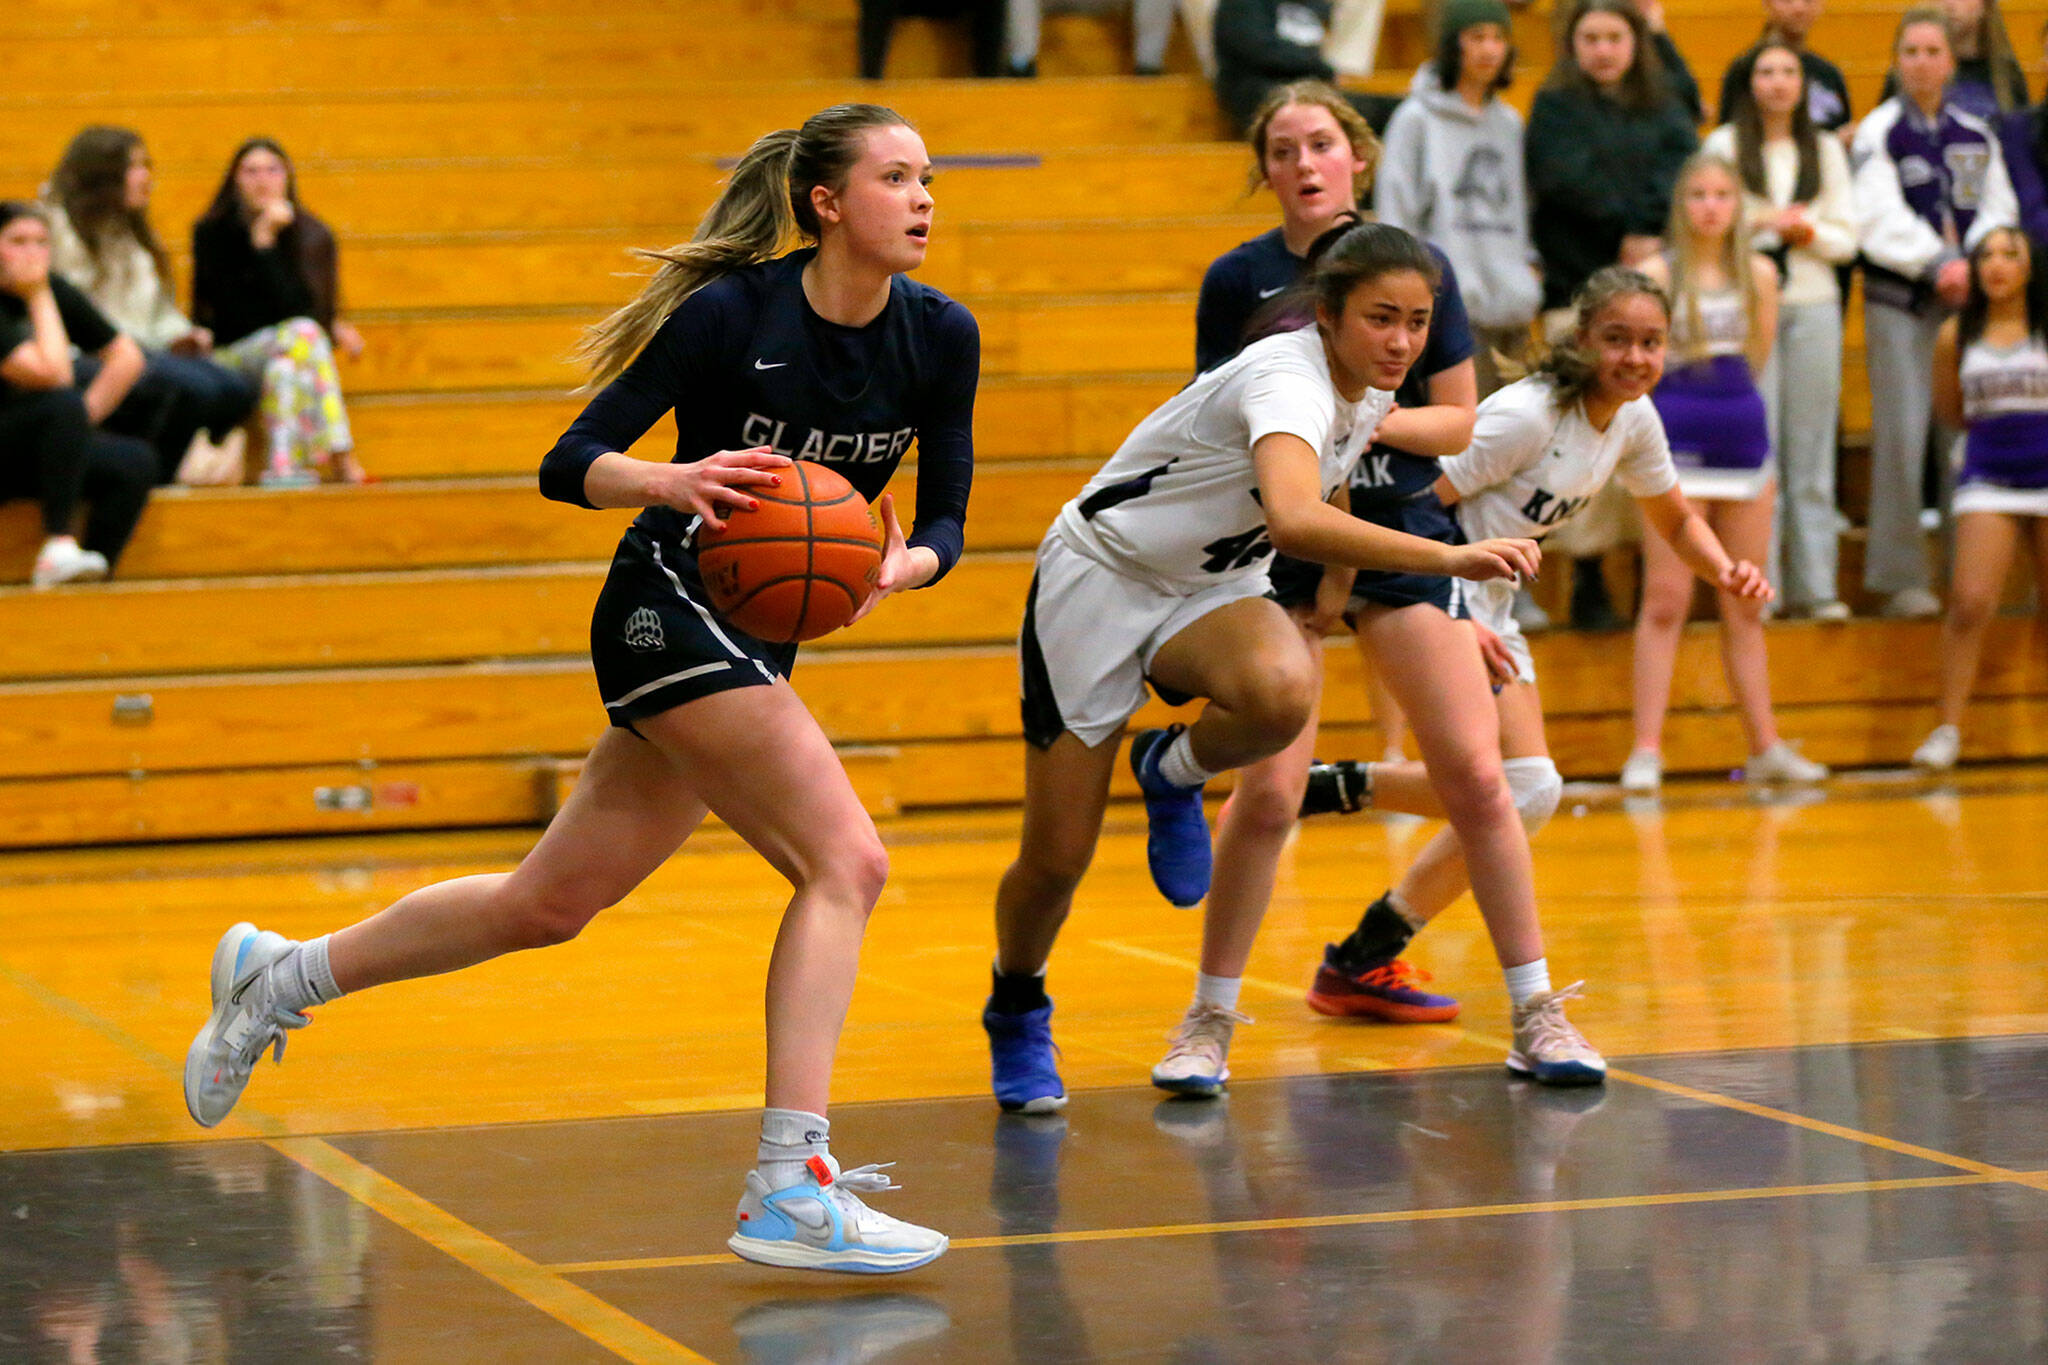 Glacier Peak’s Kylani Rookstool looks for an outlet pass after pulling down a rebound against Kamiak on Feb 1 at Kamiak High School in Mukilteo. Rookstool is one of four local girls competing in this weekend’s Washington State Girls Basketball Coaches Association Senior All-State Games (Ryan Berry / The Herald)